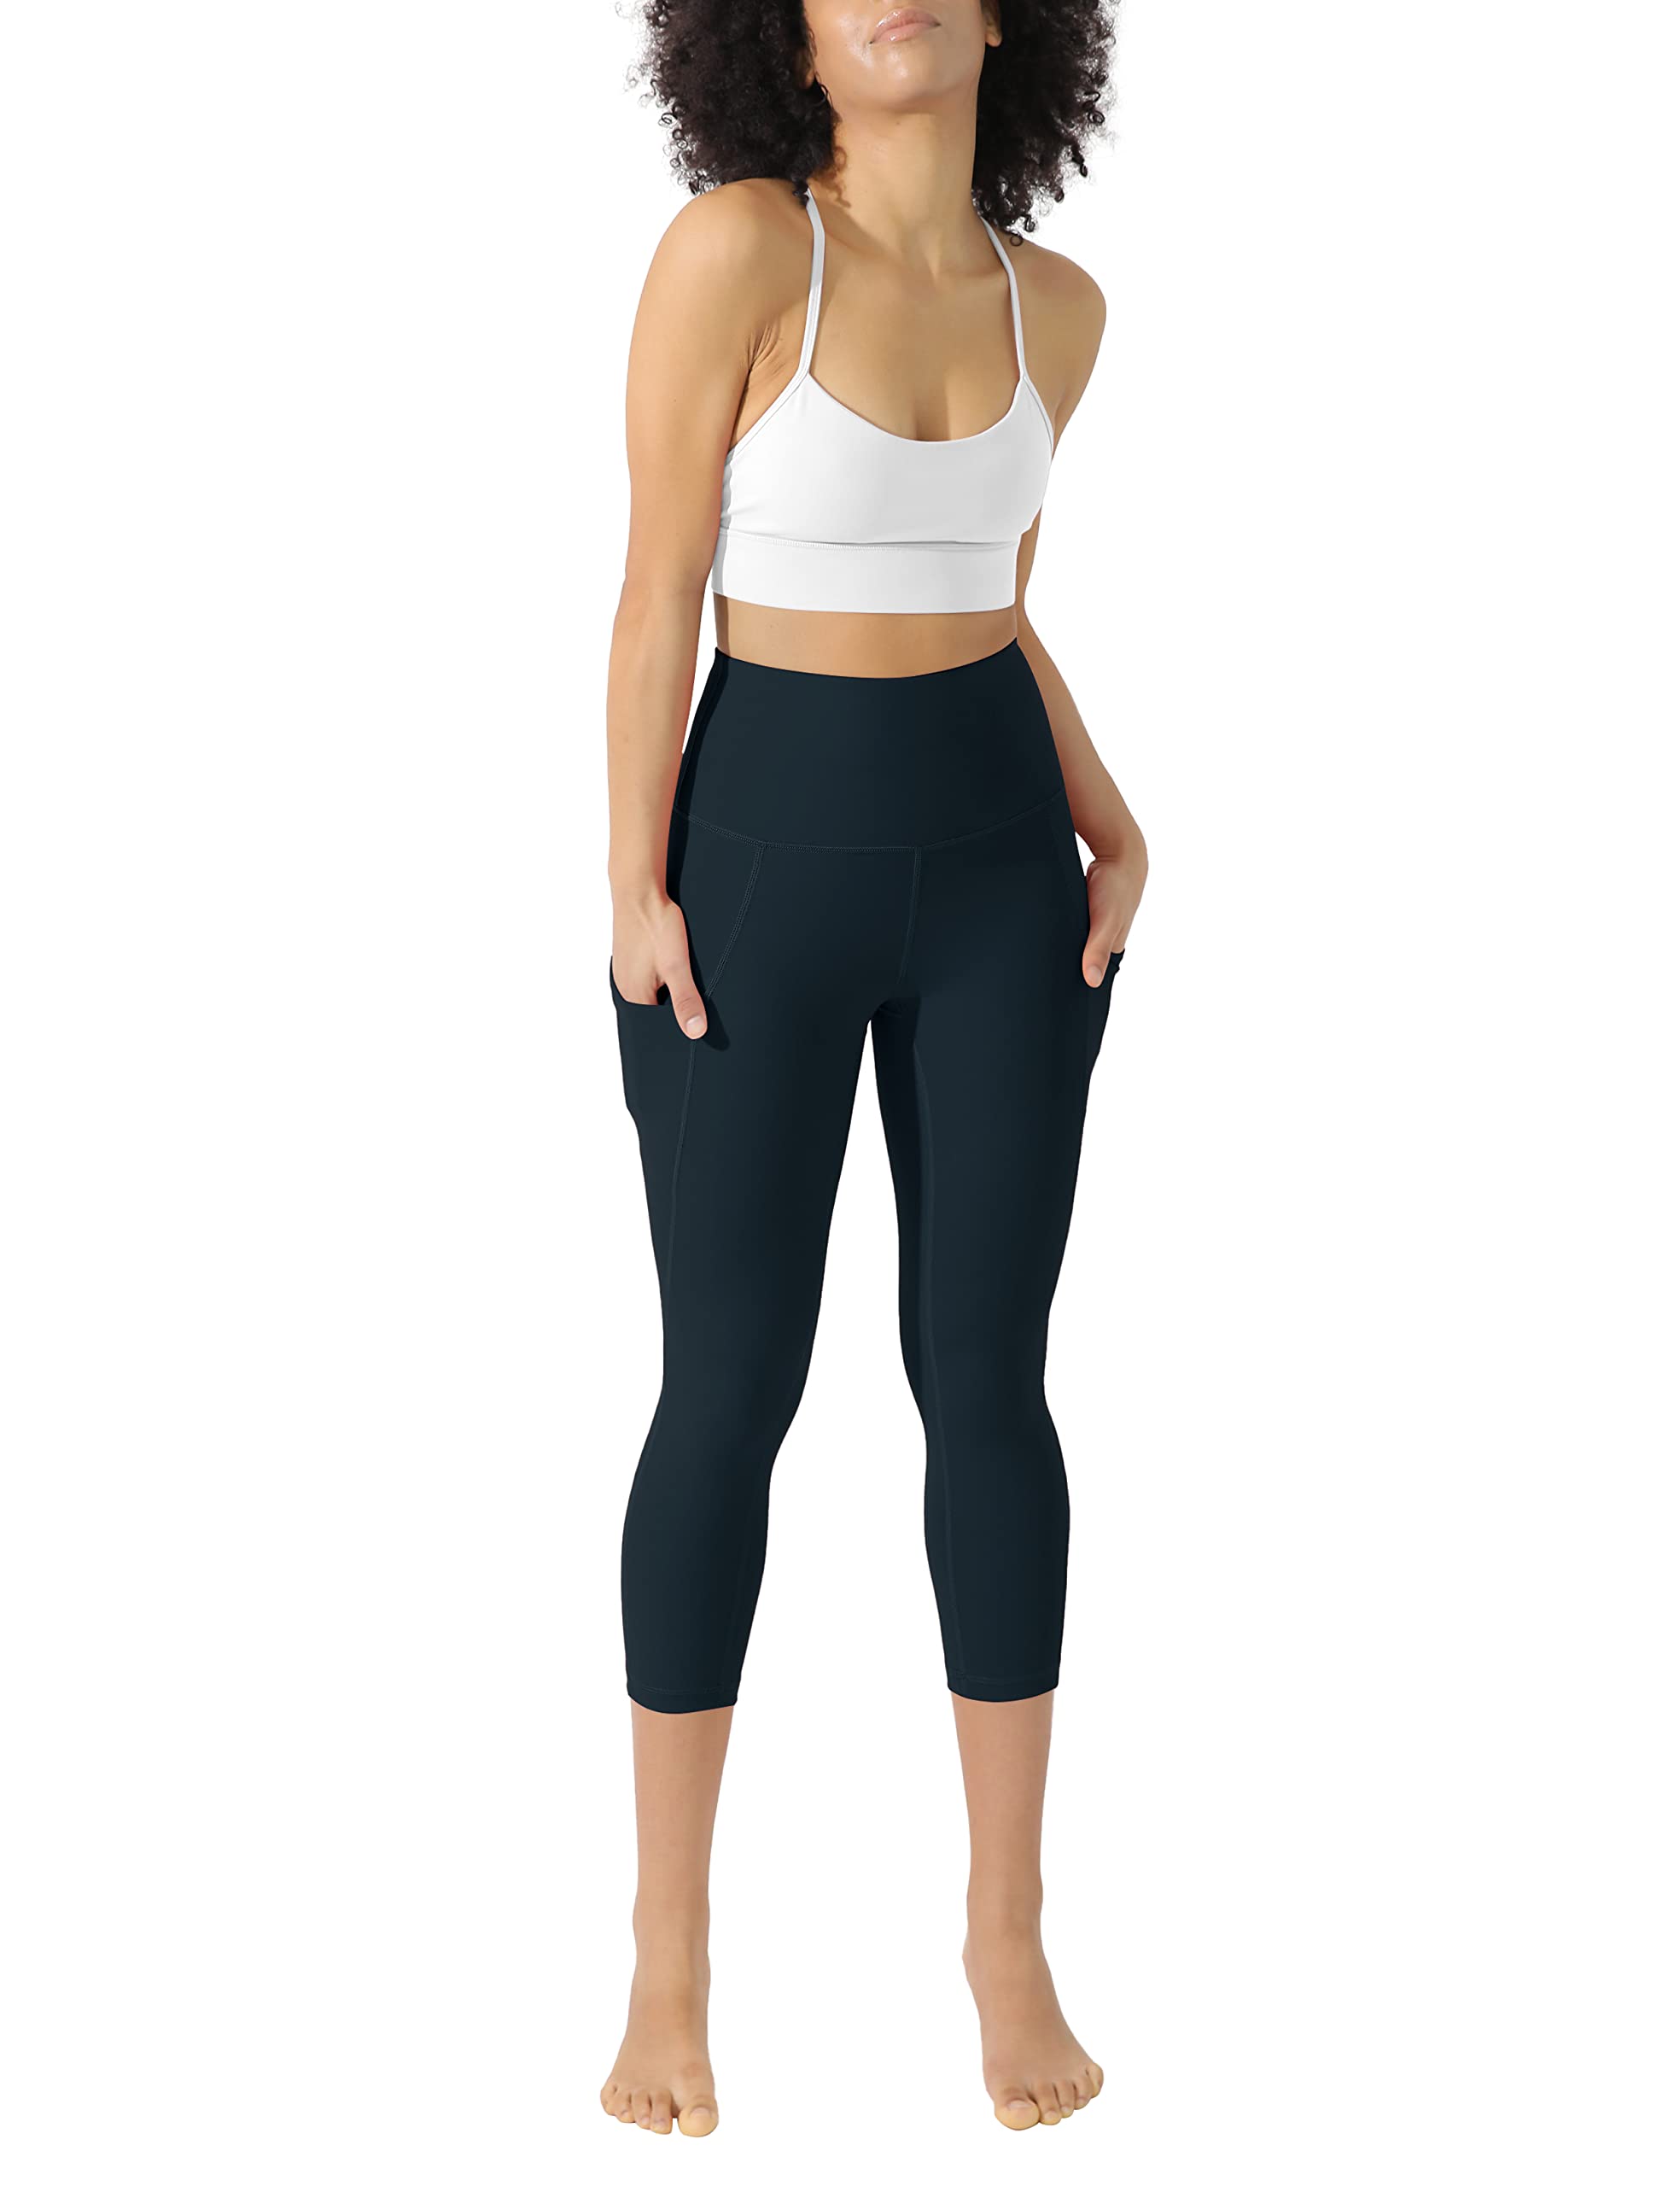 ODODOS Women's High Waisted Yoga Capris with Pockets,Tummy Control Non See Through Workout Sports Running Capri Leggings